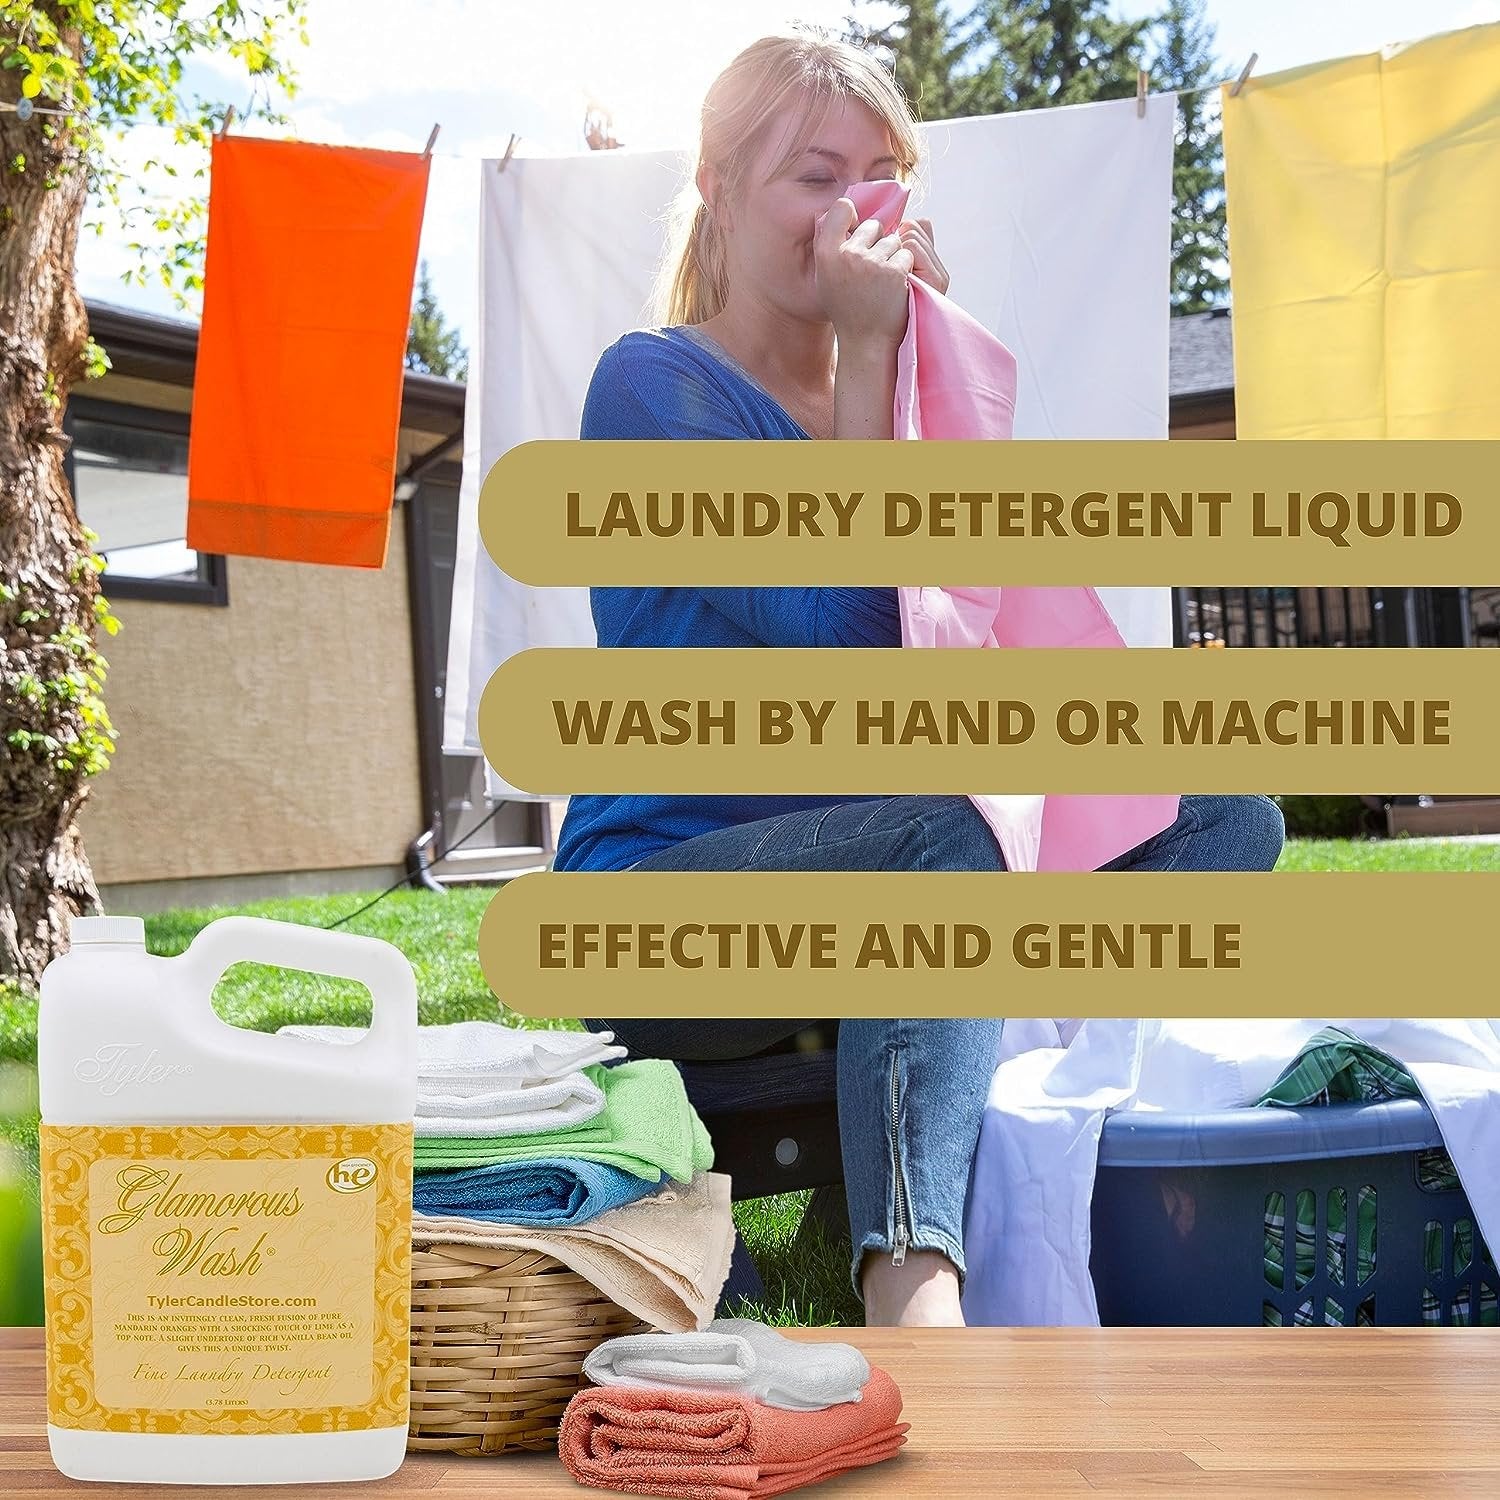 Worldwide Nutrition Bundle: Tyler Glamorous Wash Wishlist Scent Fine Laundry Liquid Detergent - Hand and Machine Washable - 3.78L (1Gallon) Container and Multi-Purpose Key Chain